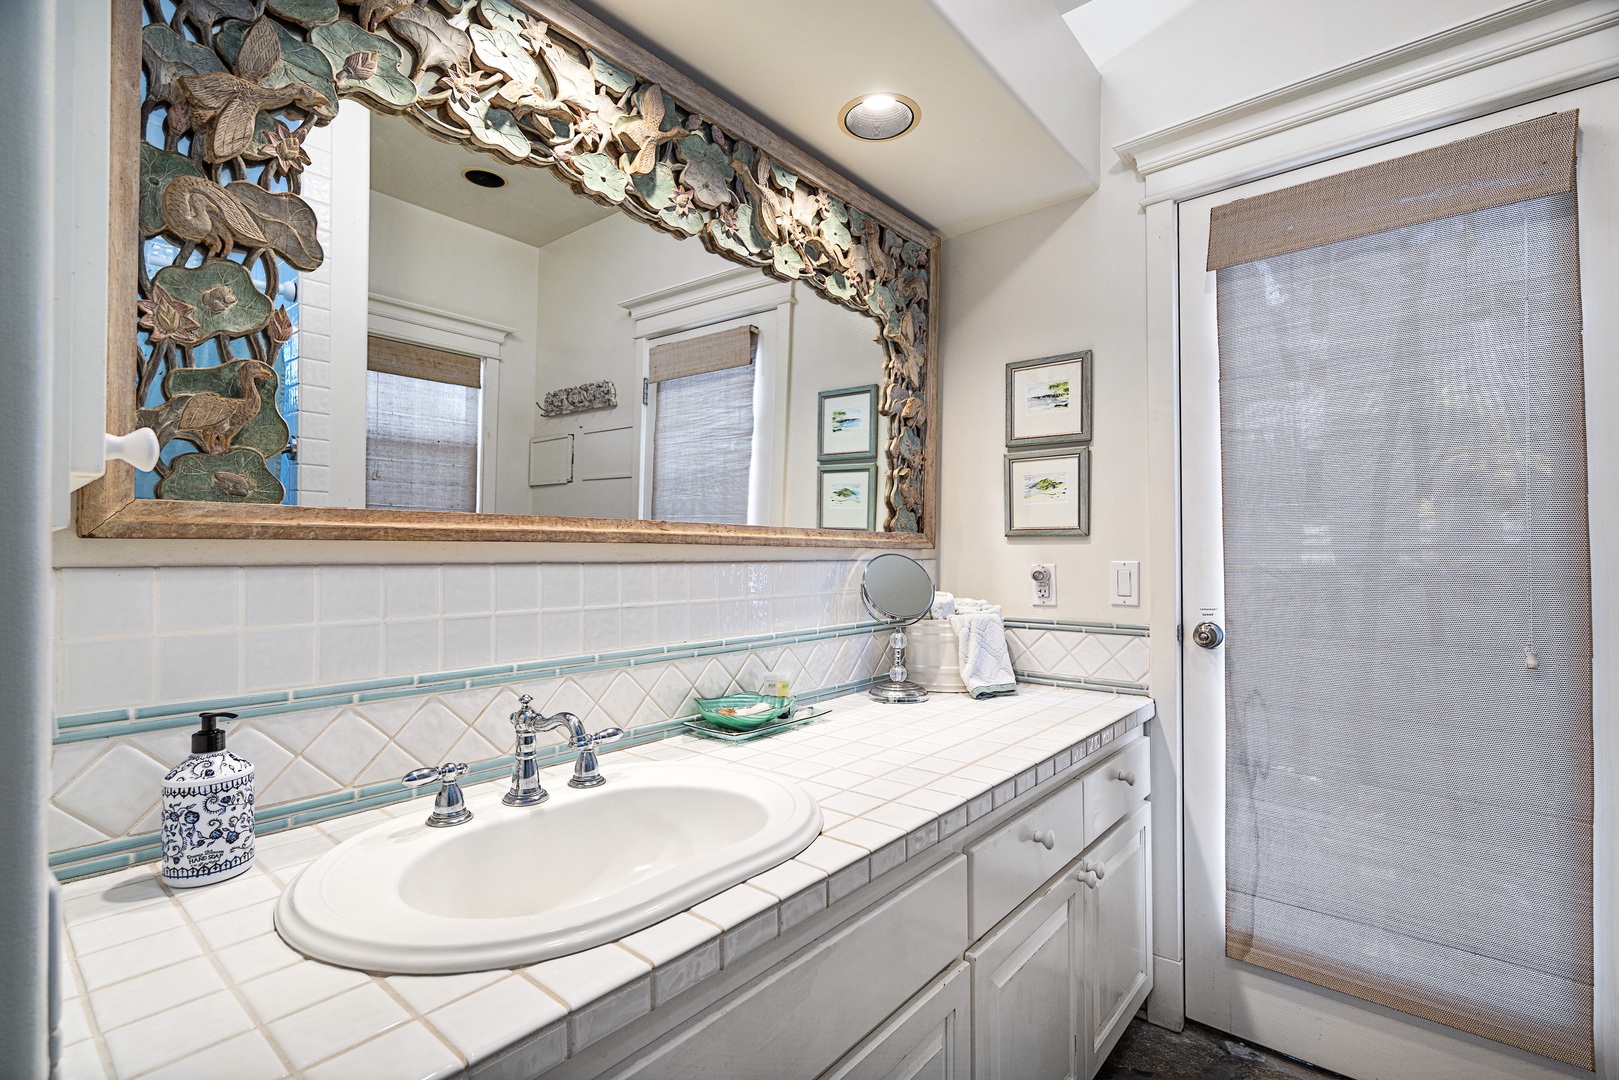 Kailua Kona Vacation Rentals, Kona Blue - Downstairs ensuite with access to the outdoor shower